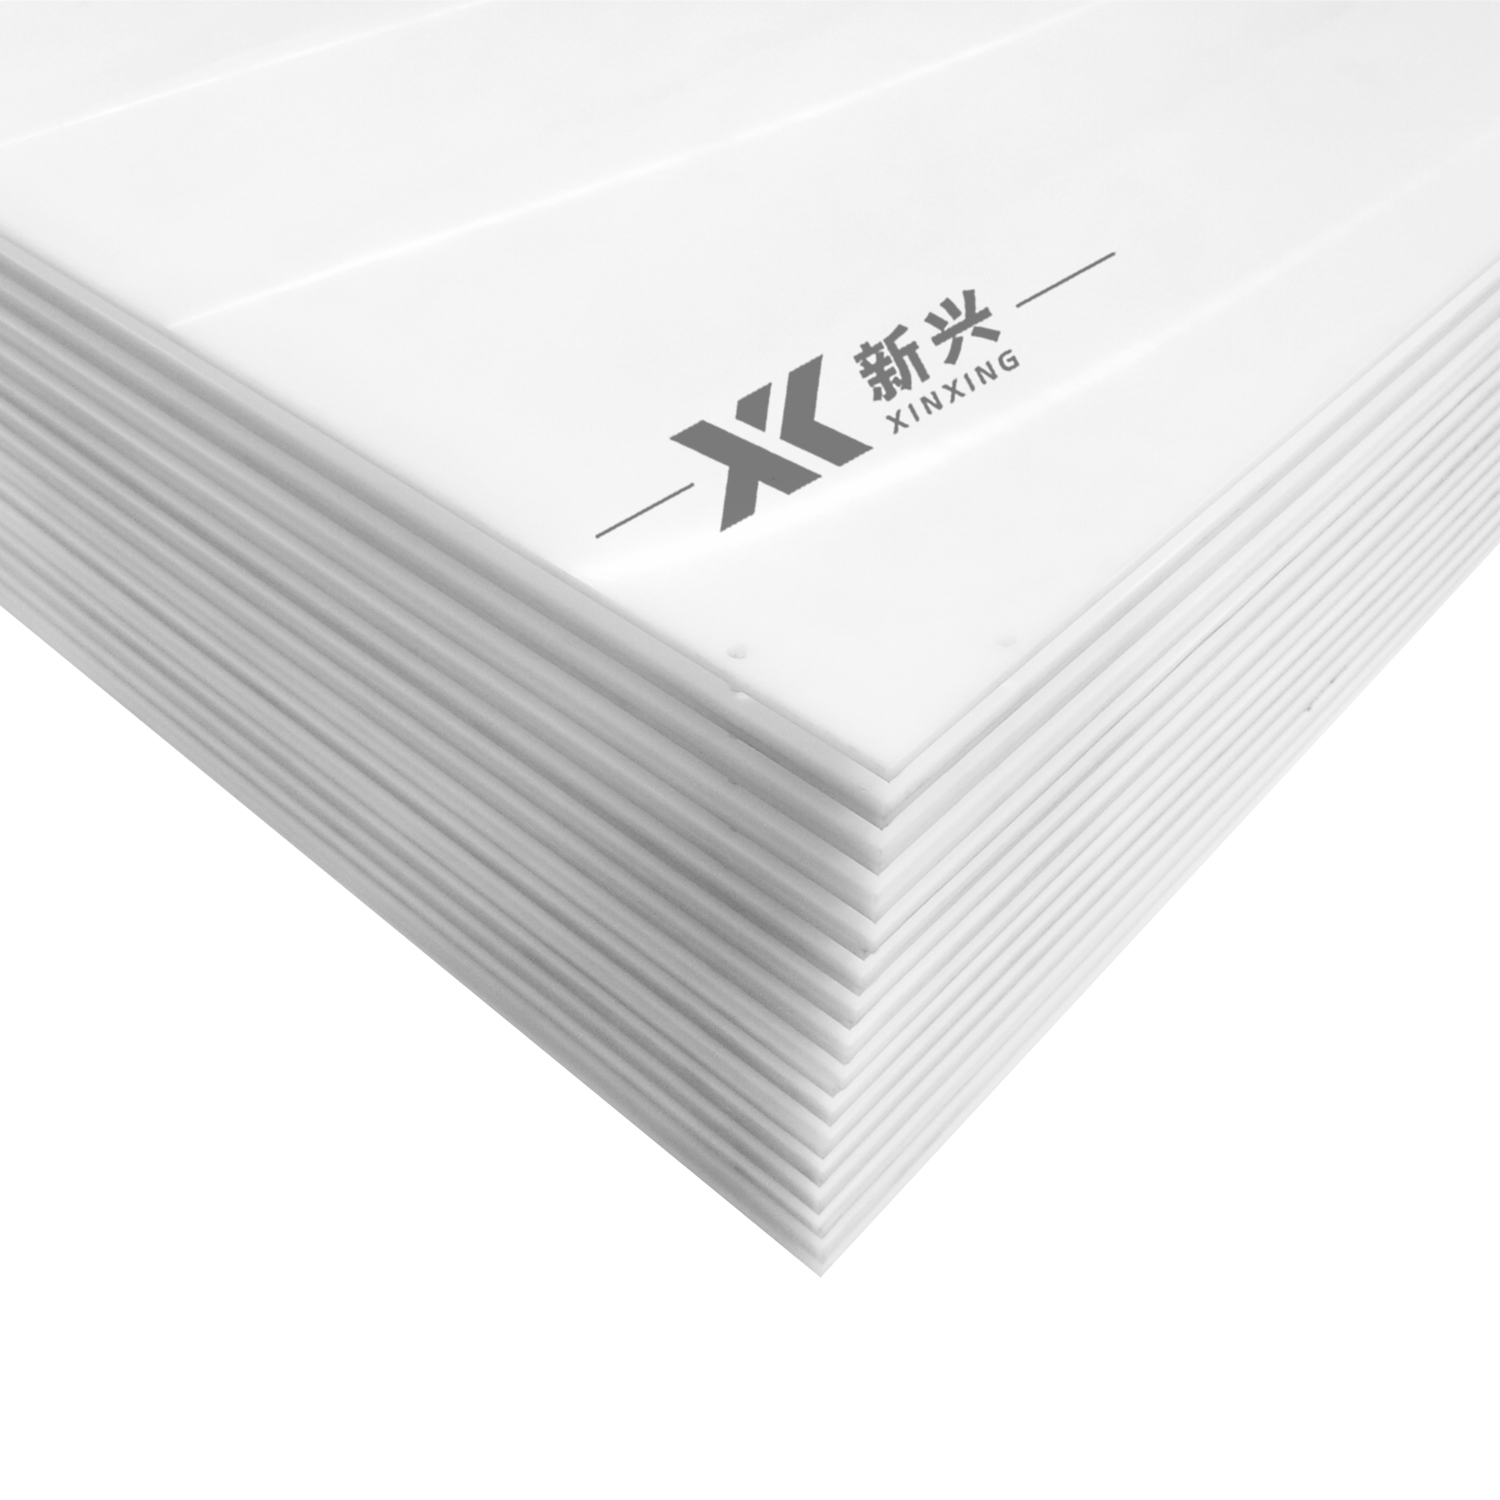 Anti-Impact, UHMWPE Sheet for Coal Bed Liners/UHMWPE Plastic Coal Bunker Liner Sheets